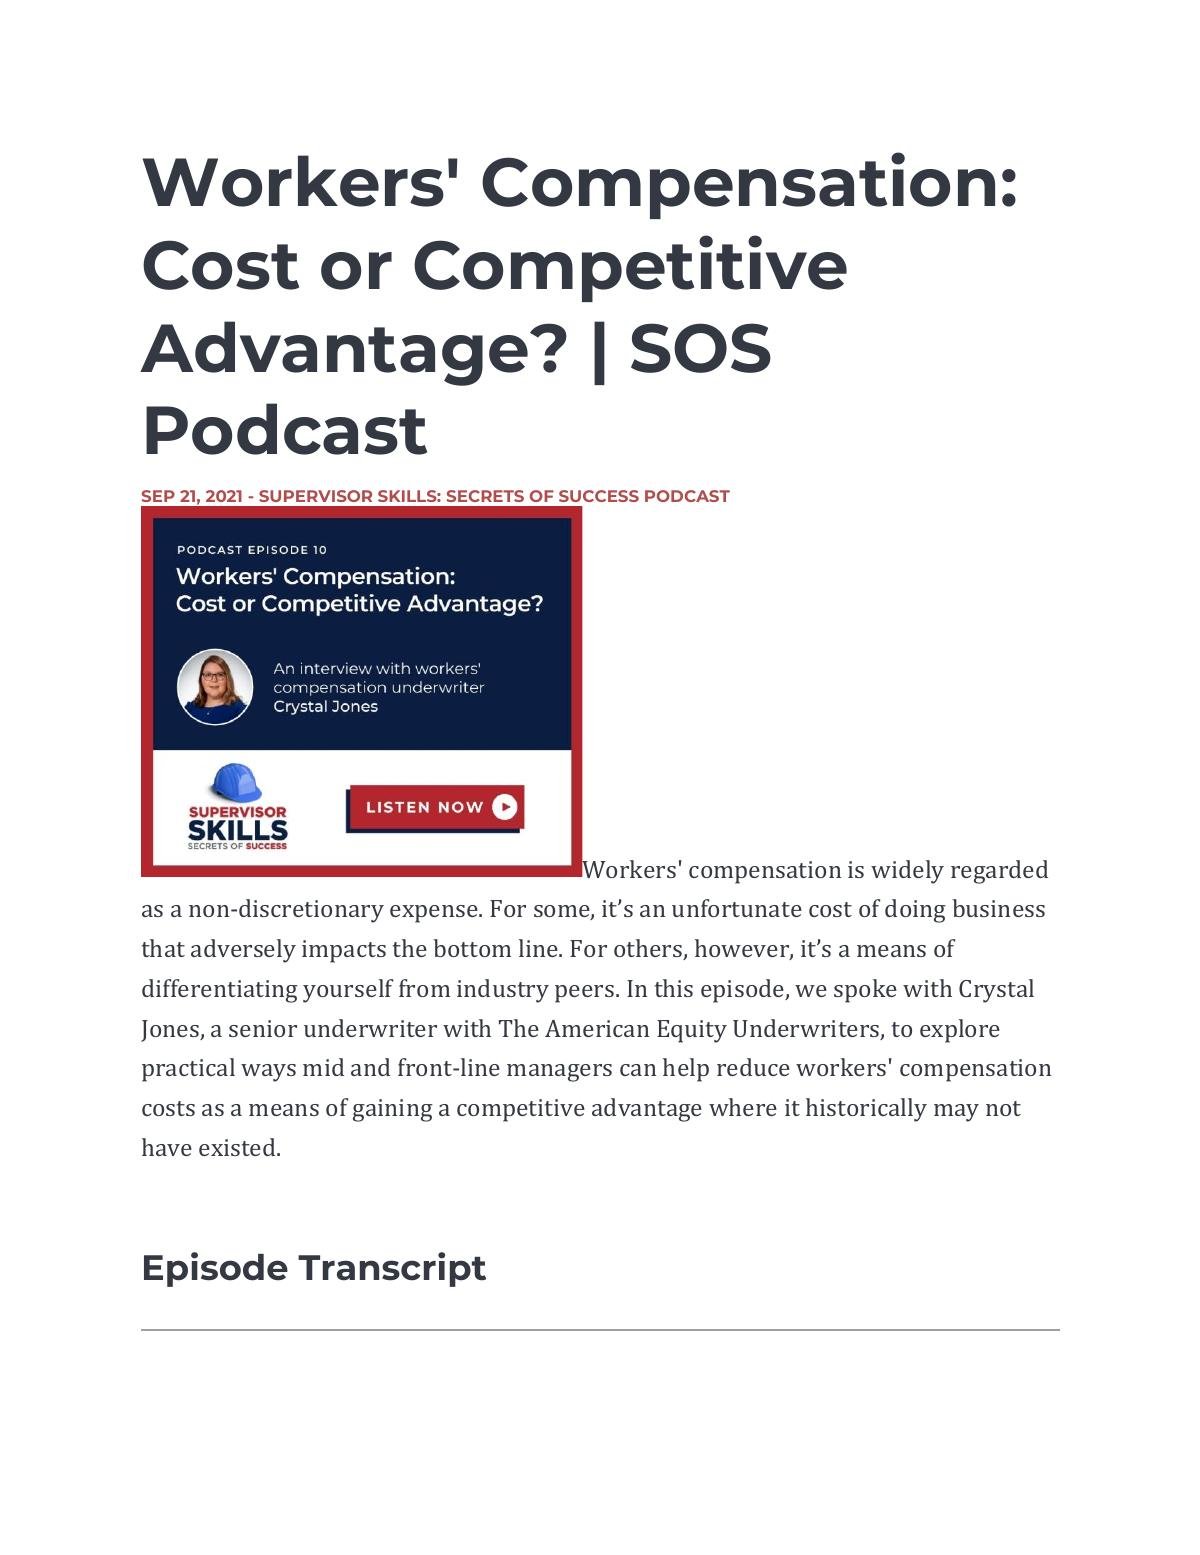 Workers' Compensation: Cost or Competitive Advantage? | SOS Podcast